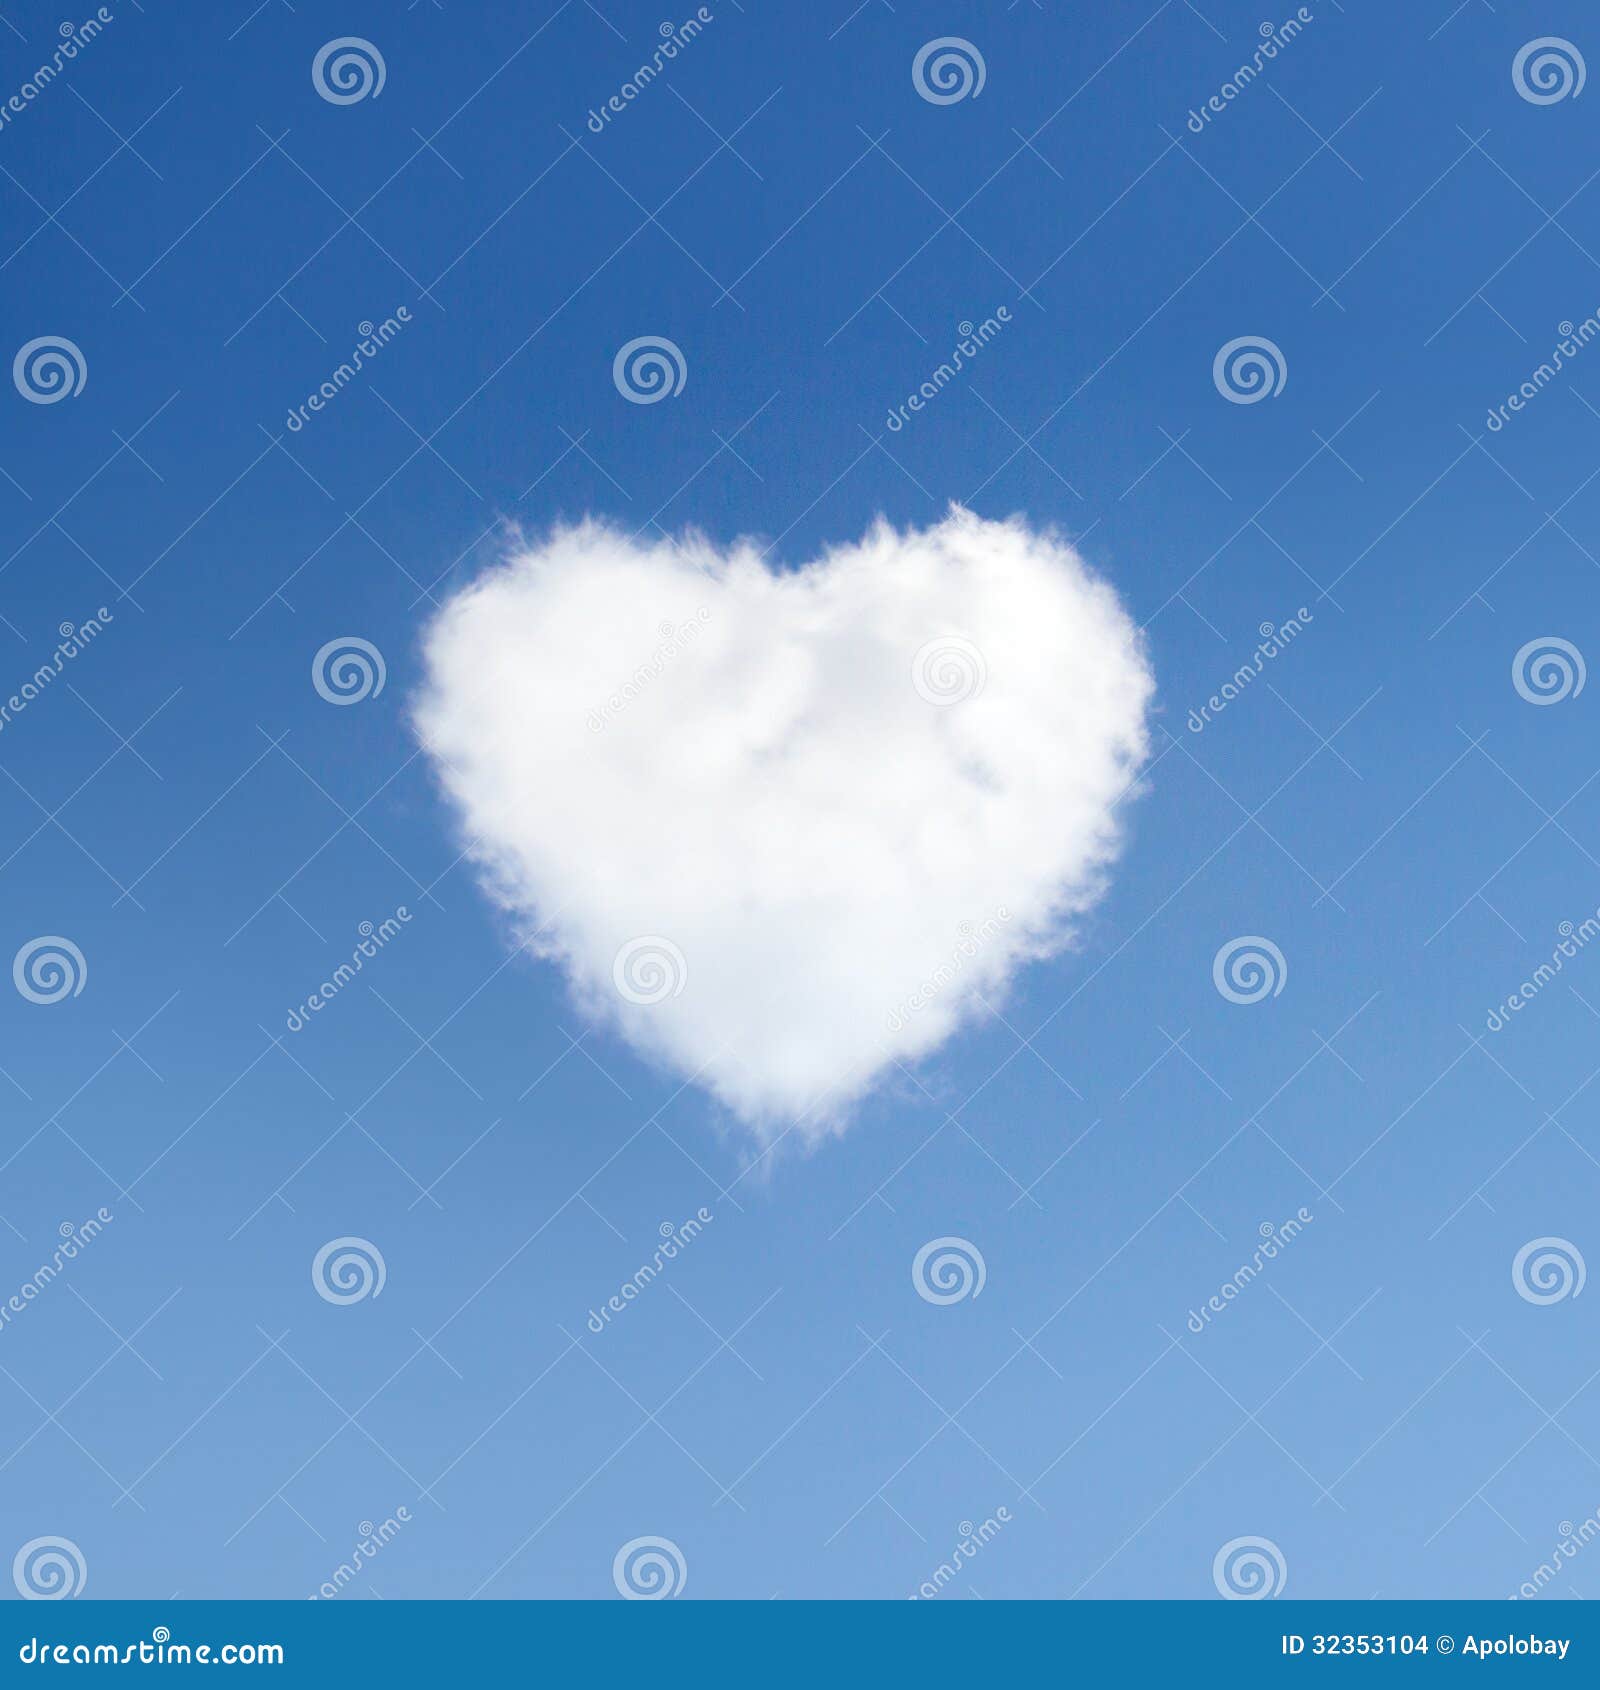 Heart of Clouds Symbol of Love on Background of Blue Sky Stock